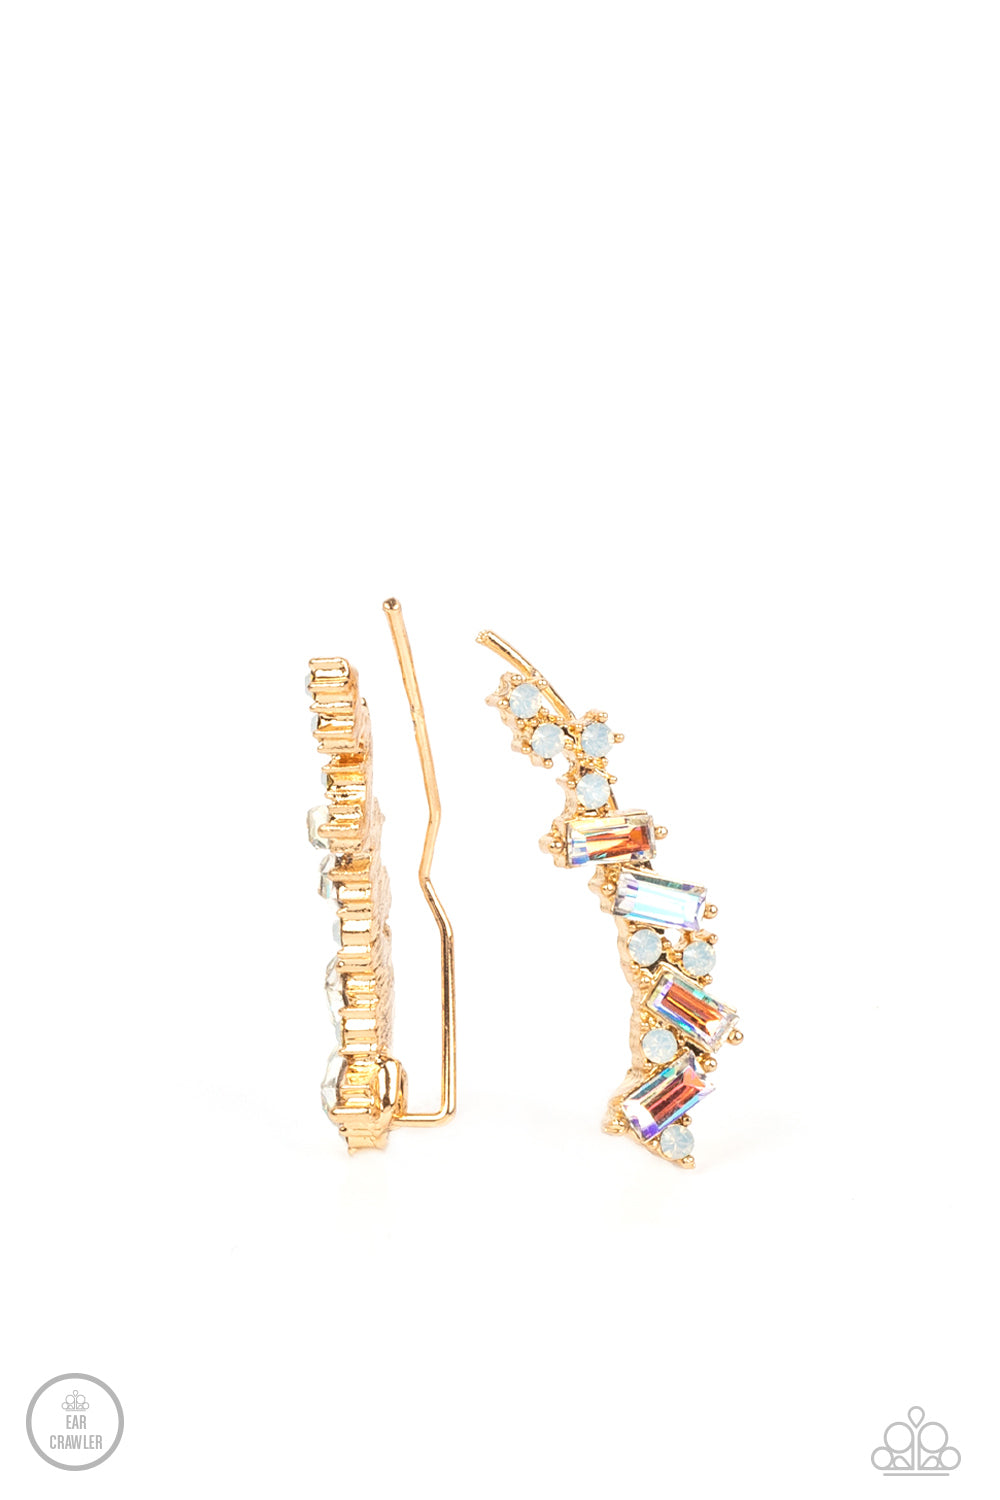 Stay Magical - gold - Paparazzi earrings